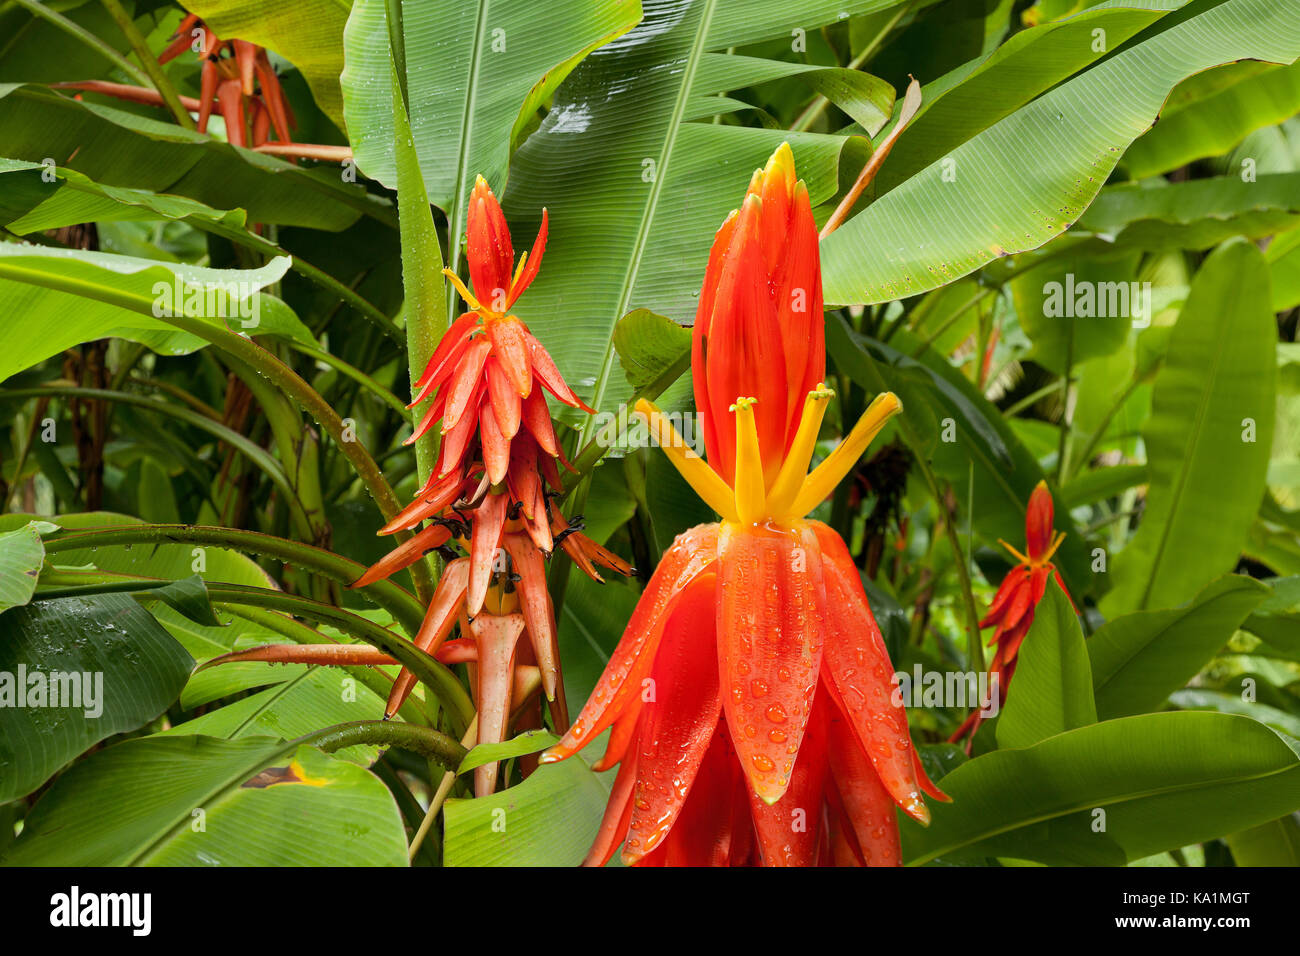 Musa Hanoi torch. banana flowers, originally from Vietnam. The trade name 'Hanoi Torch' refers to the area from which plant was first introduced . Stock Photo